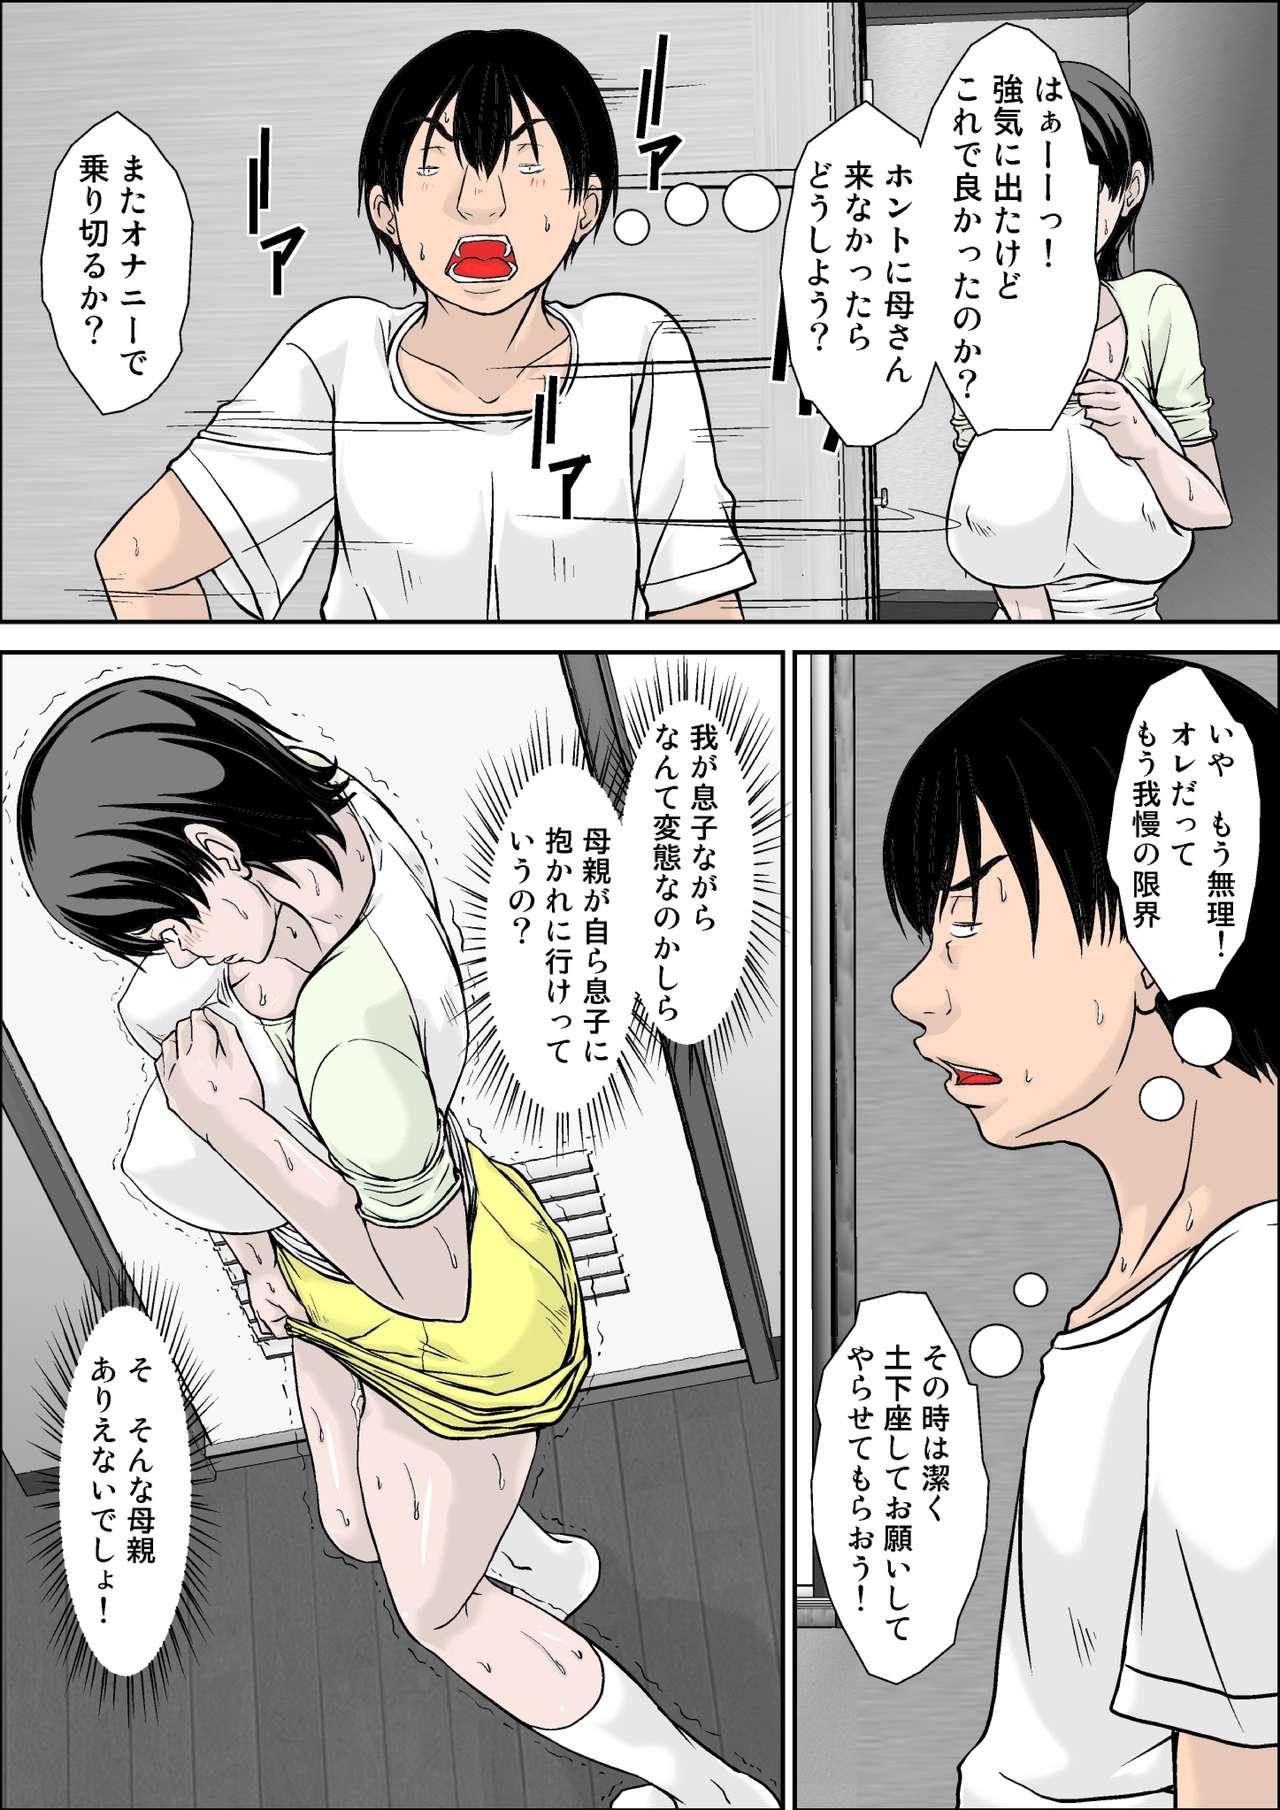 Hey! It is said that I urge you mother and will do what! ... mother Hatsujou - 1st part 40